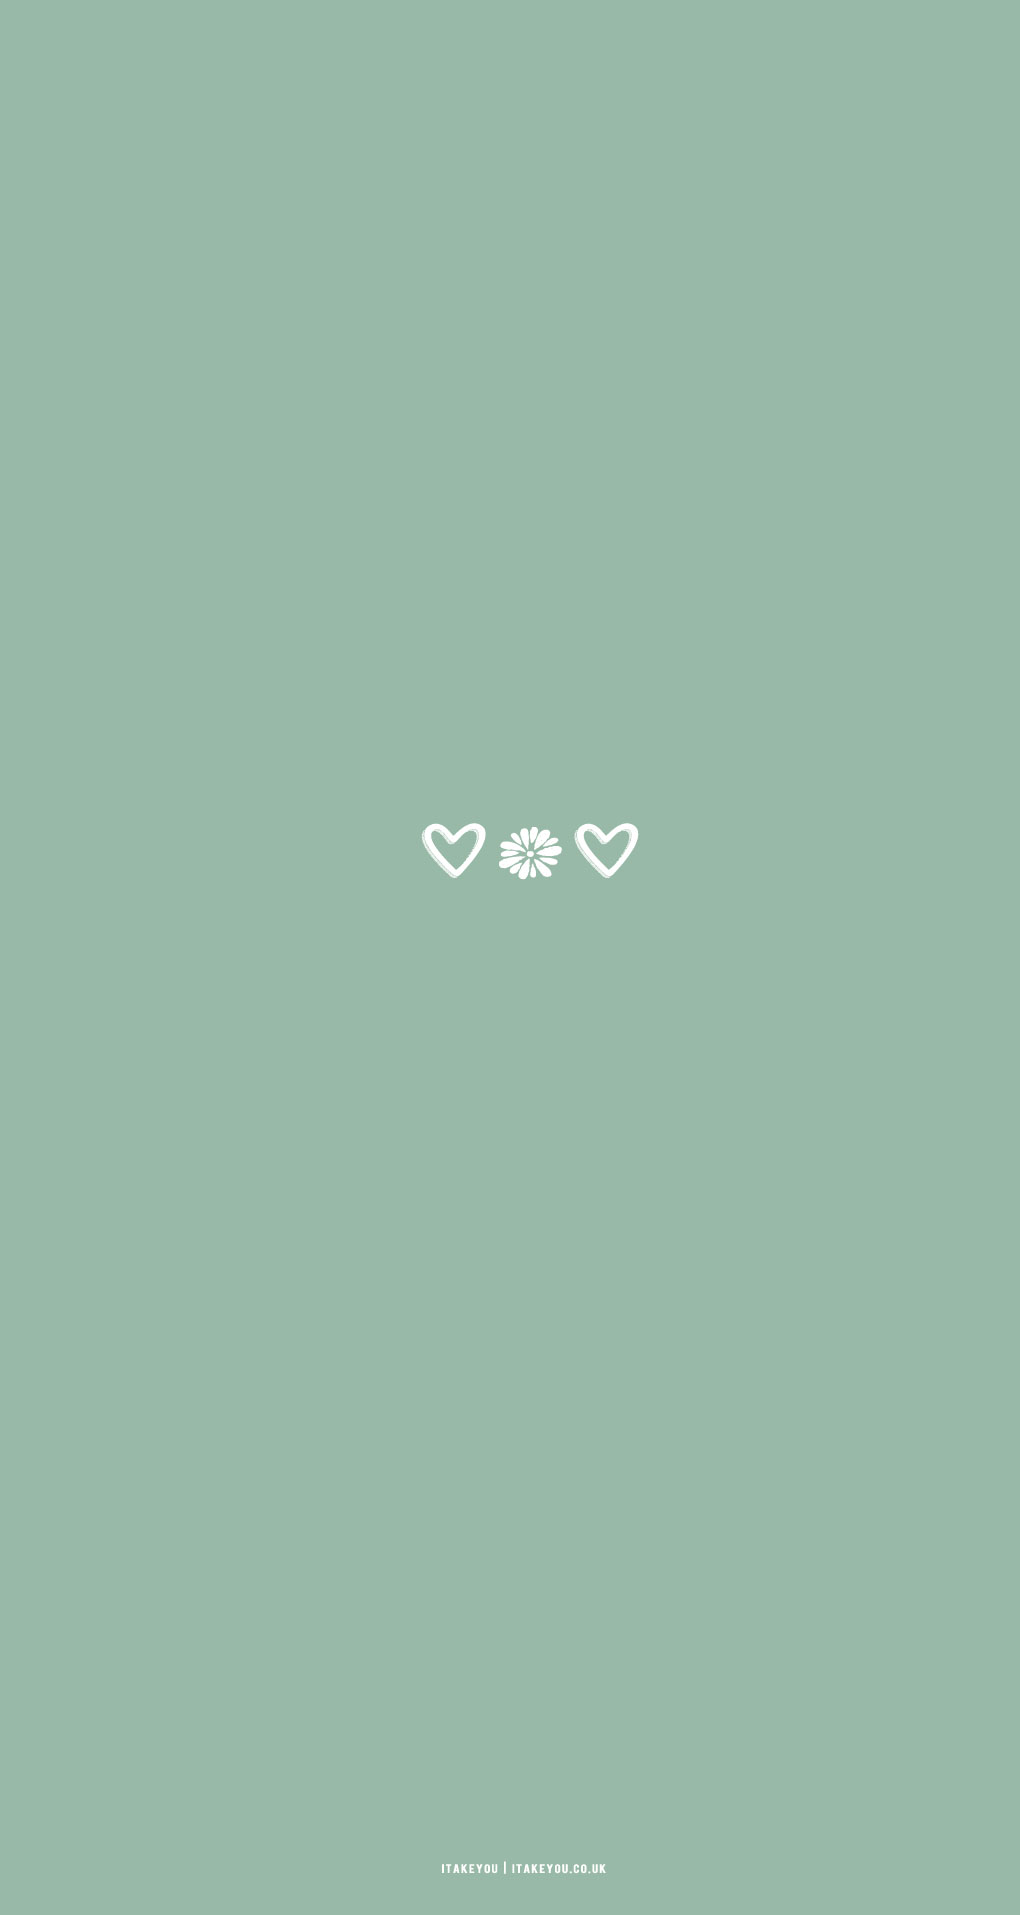 15 Sage Green Minimalist Wallpapers for Phone : Flower & Hearts